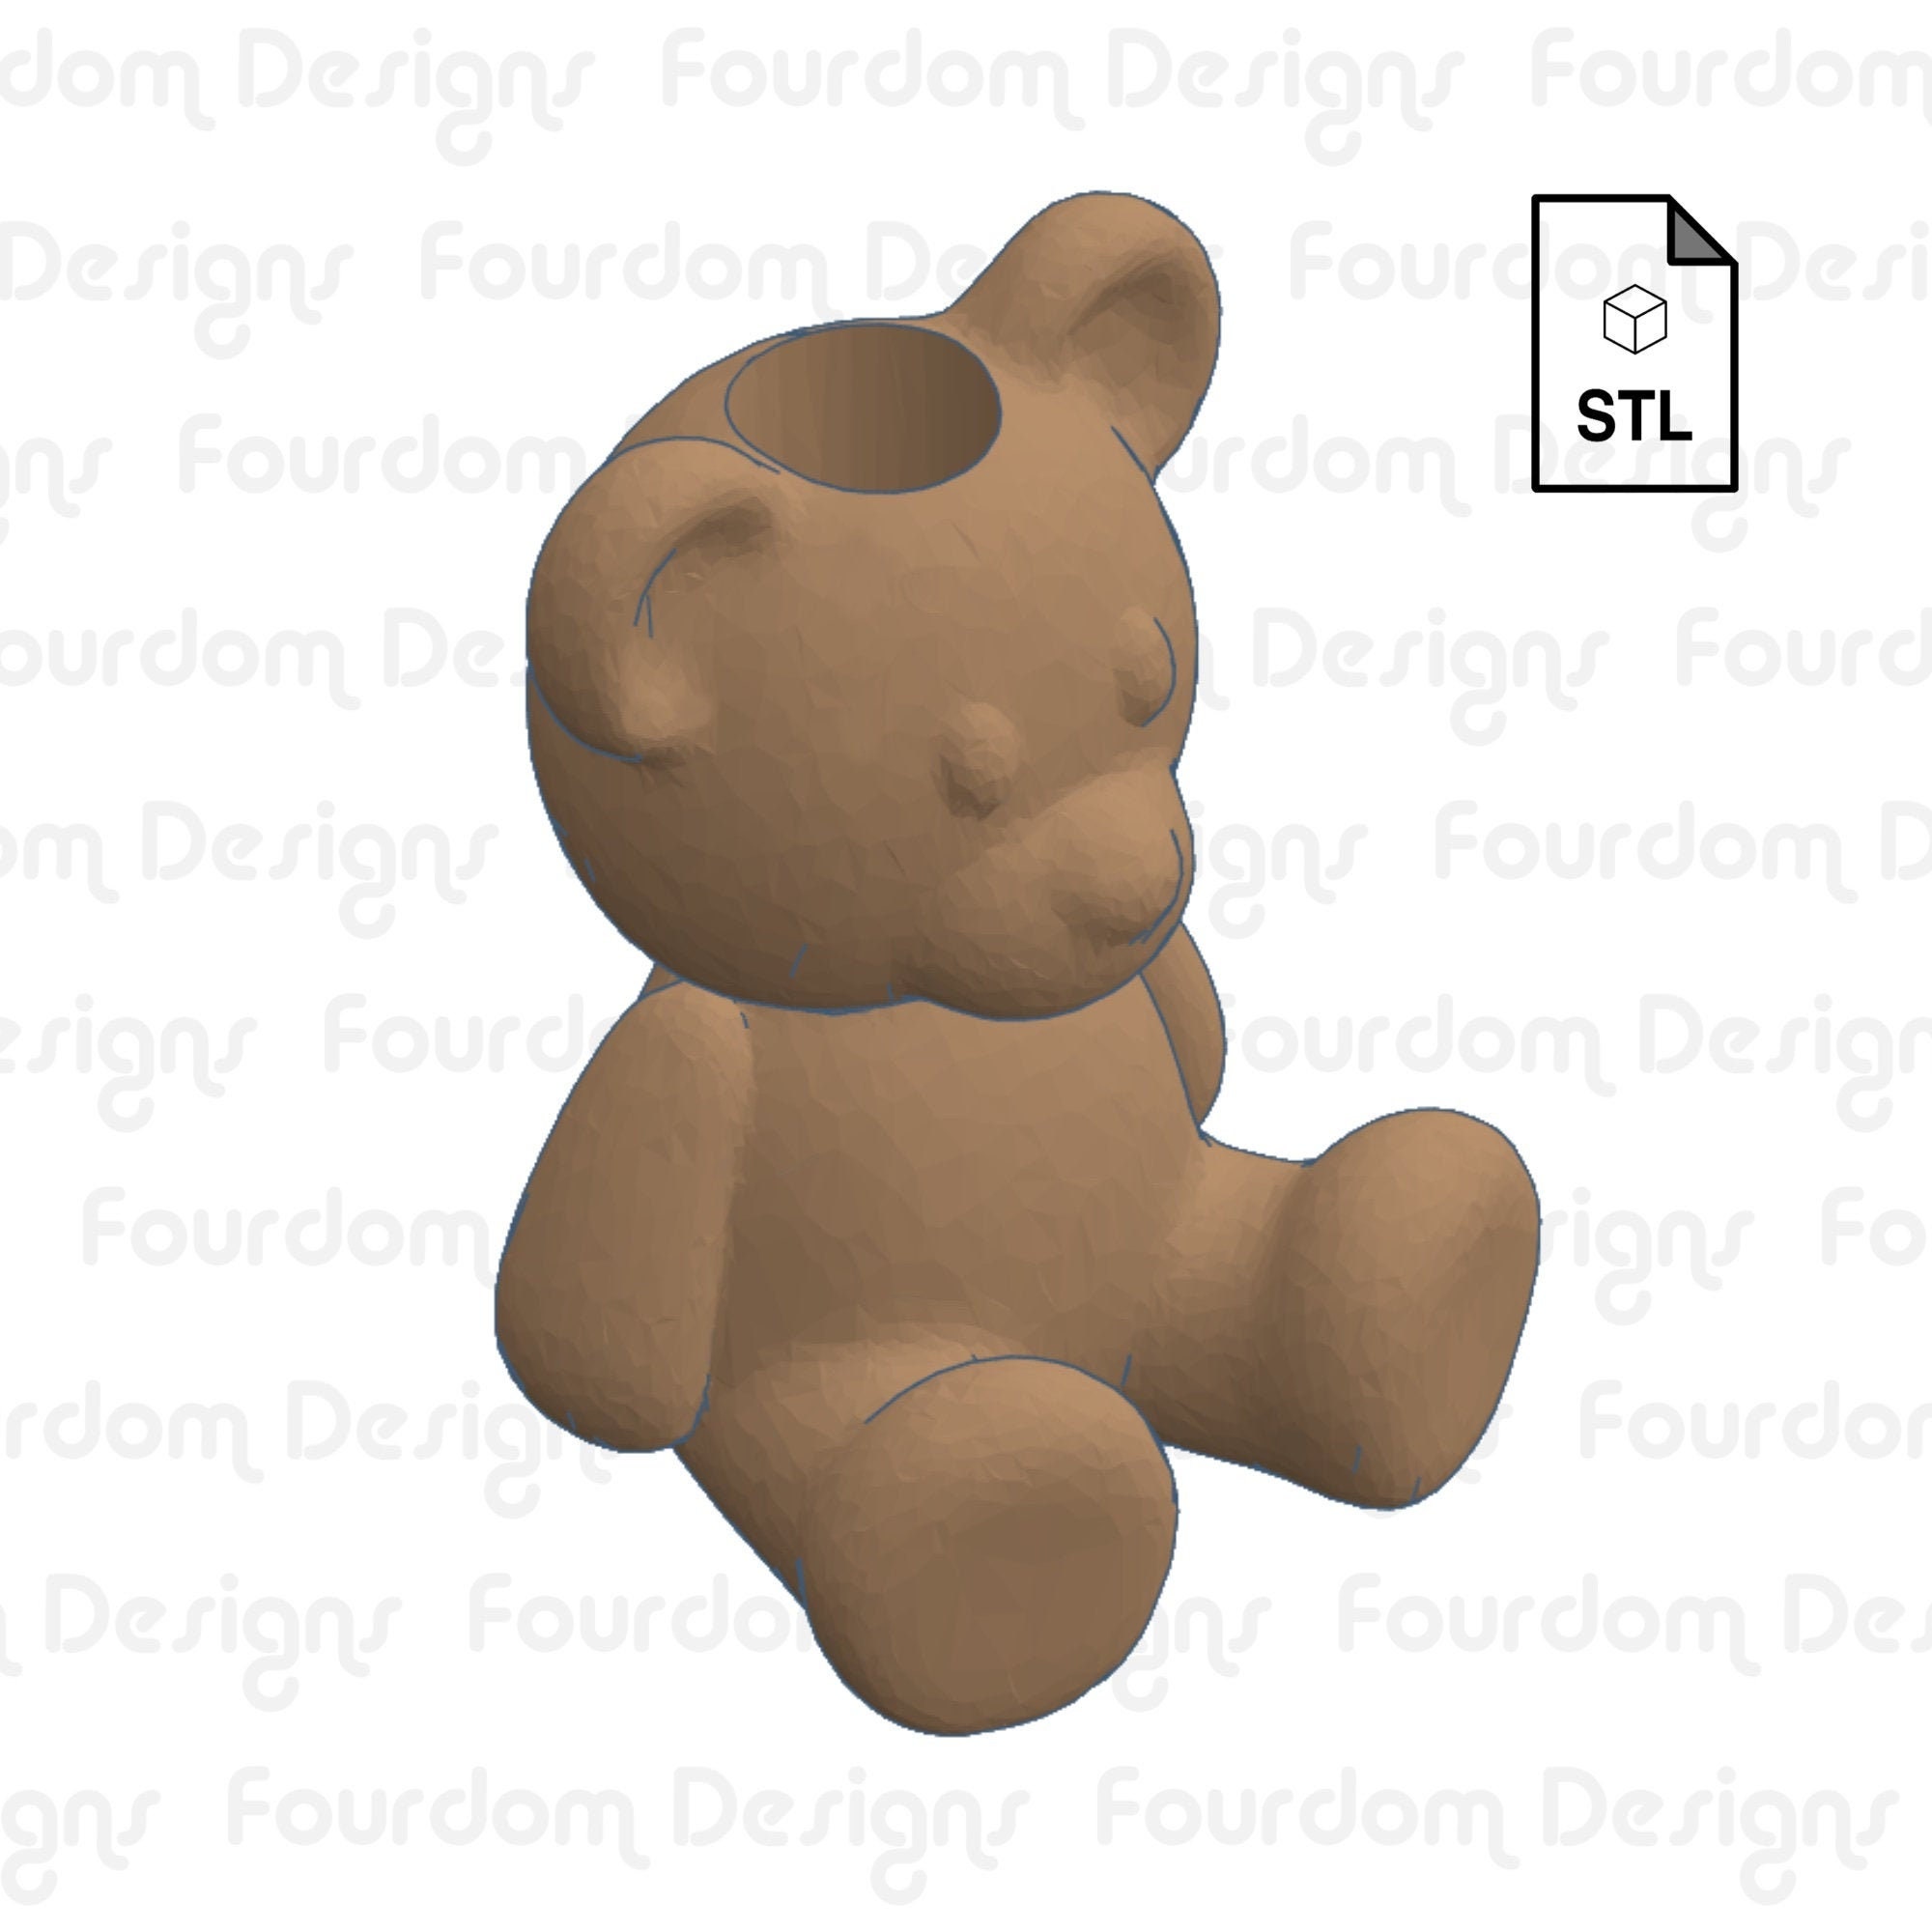 3D Teddy Bear Silicone Mold Mold for Fondant, Chocolate, Gum Paste